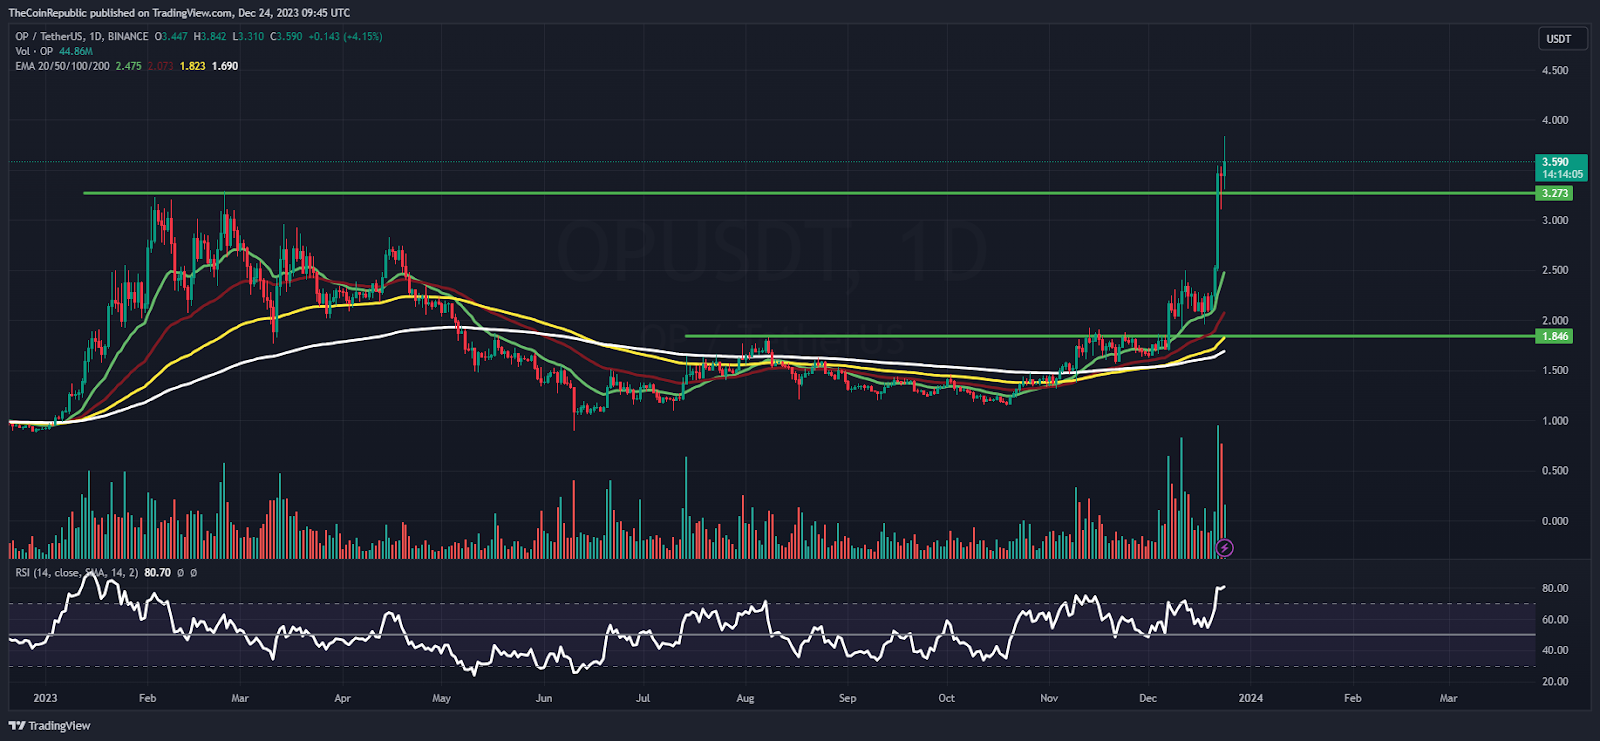 OP Price Prediction: Optimism Shines Above $3 Noted Breakout